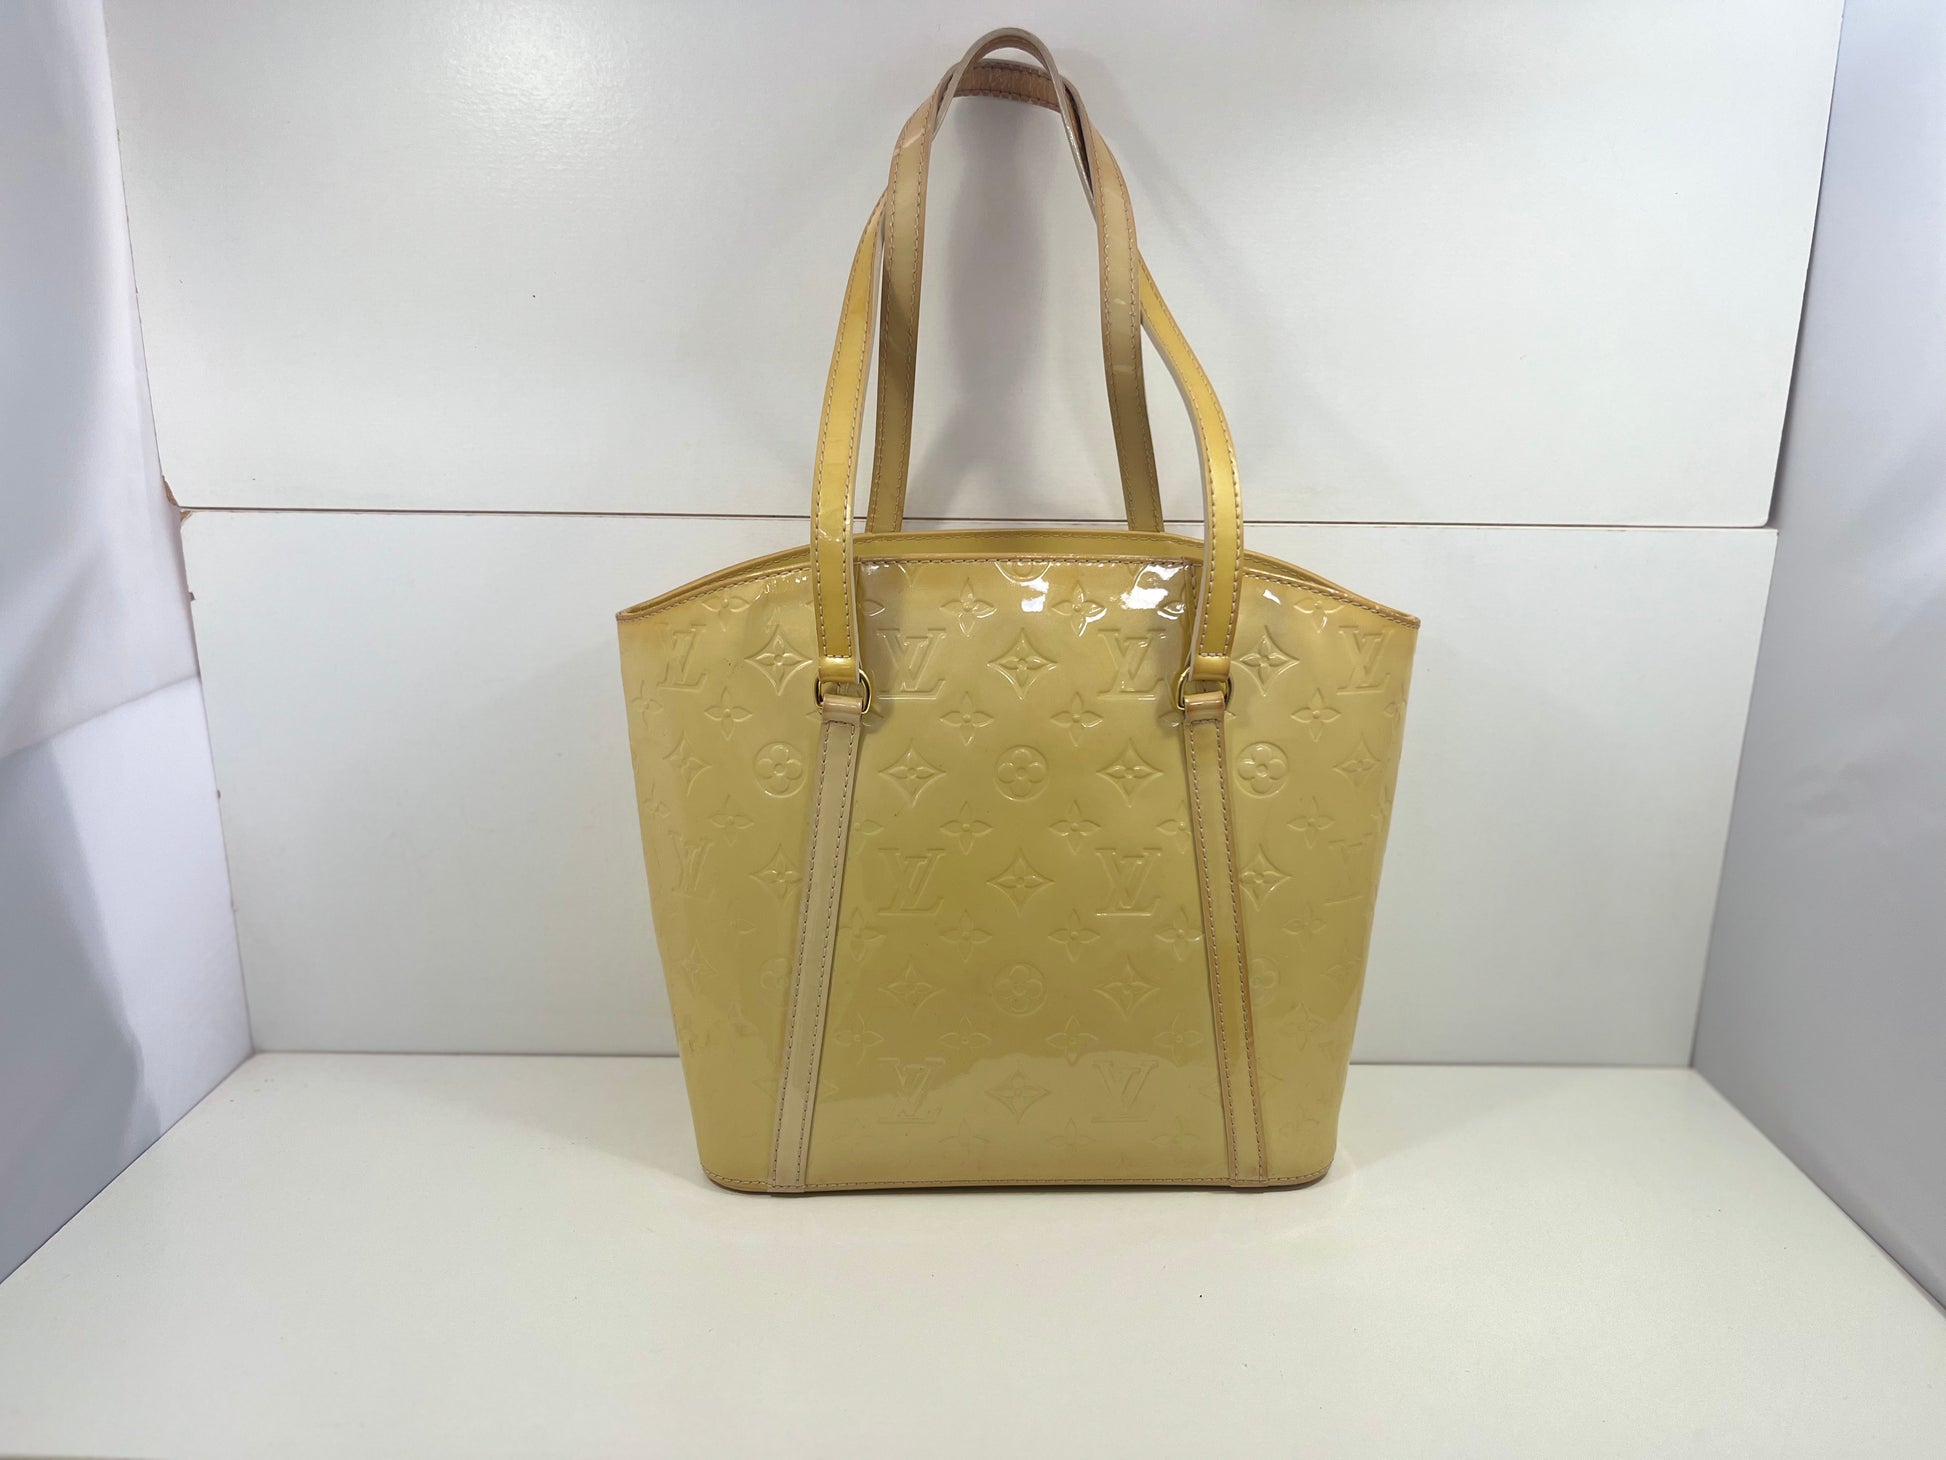 Vuitton Vernis Bag Pre-owned Perfection